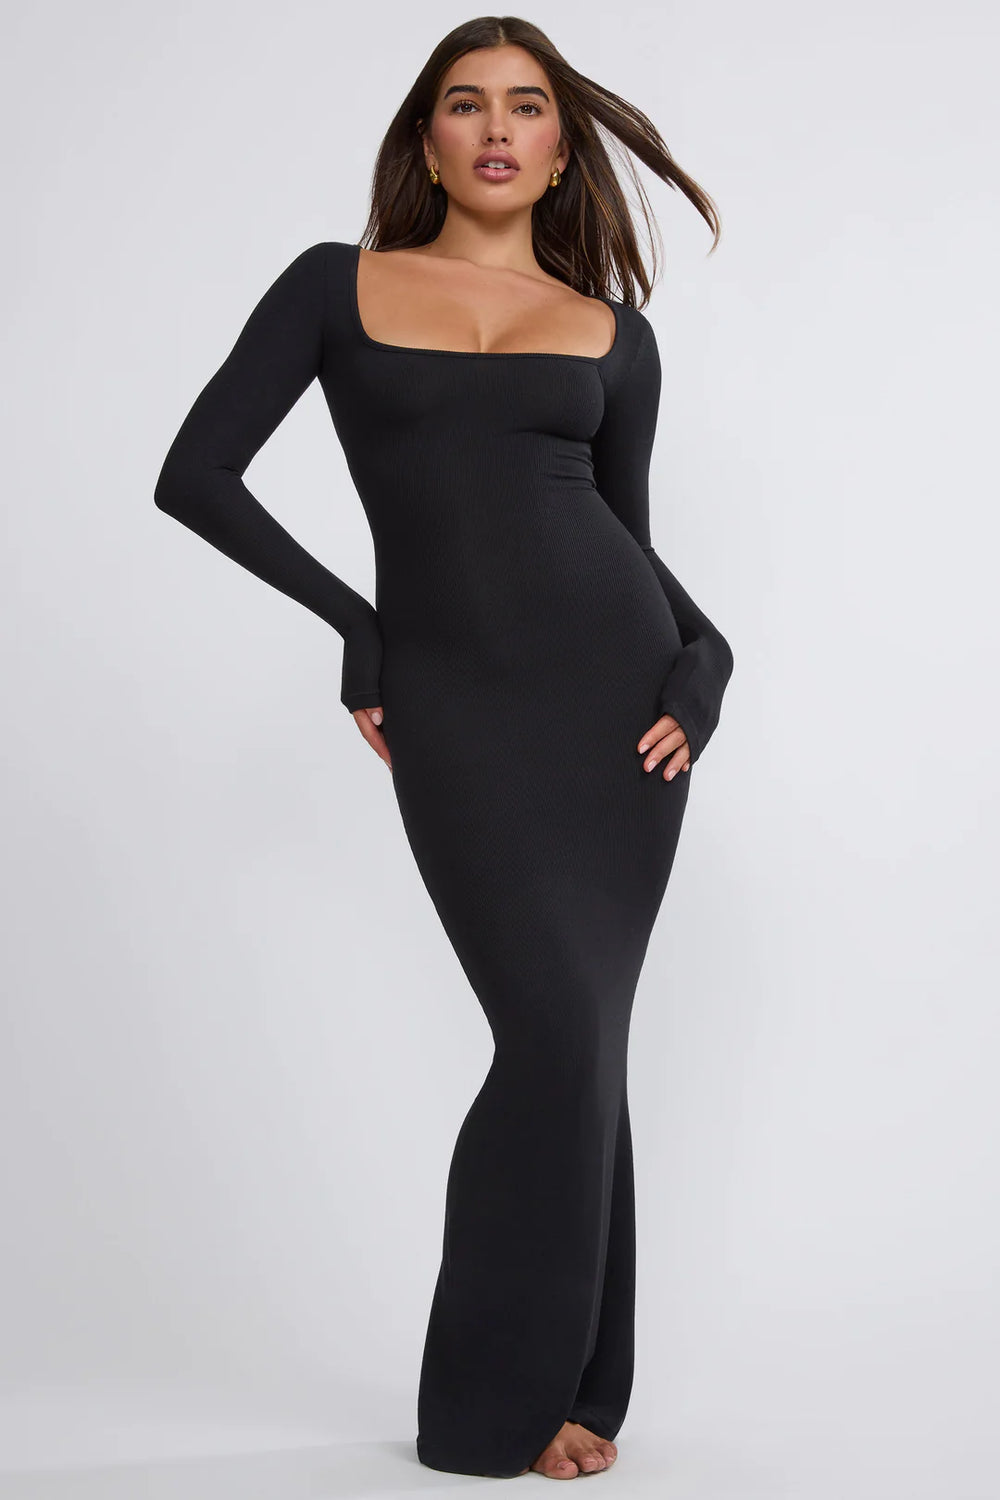 I have big boobs & tried the $25  Skims dress dupe, it's the